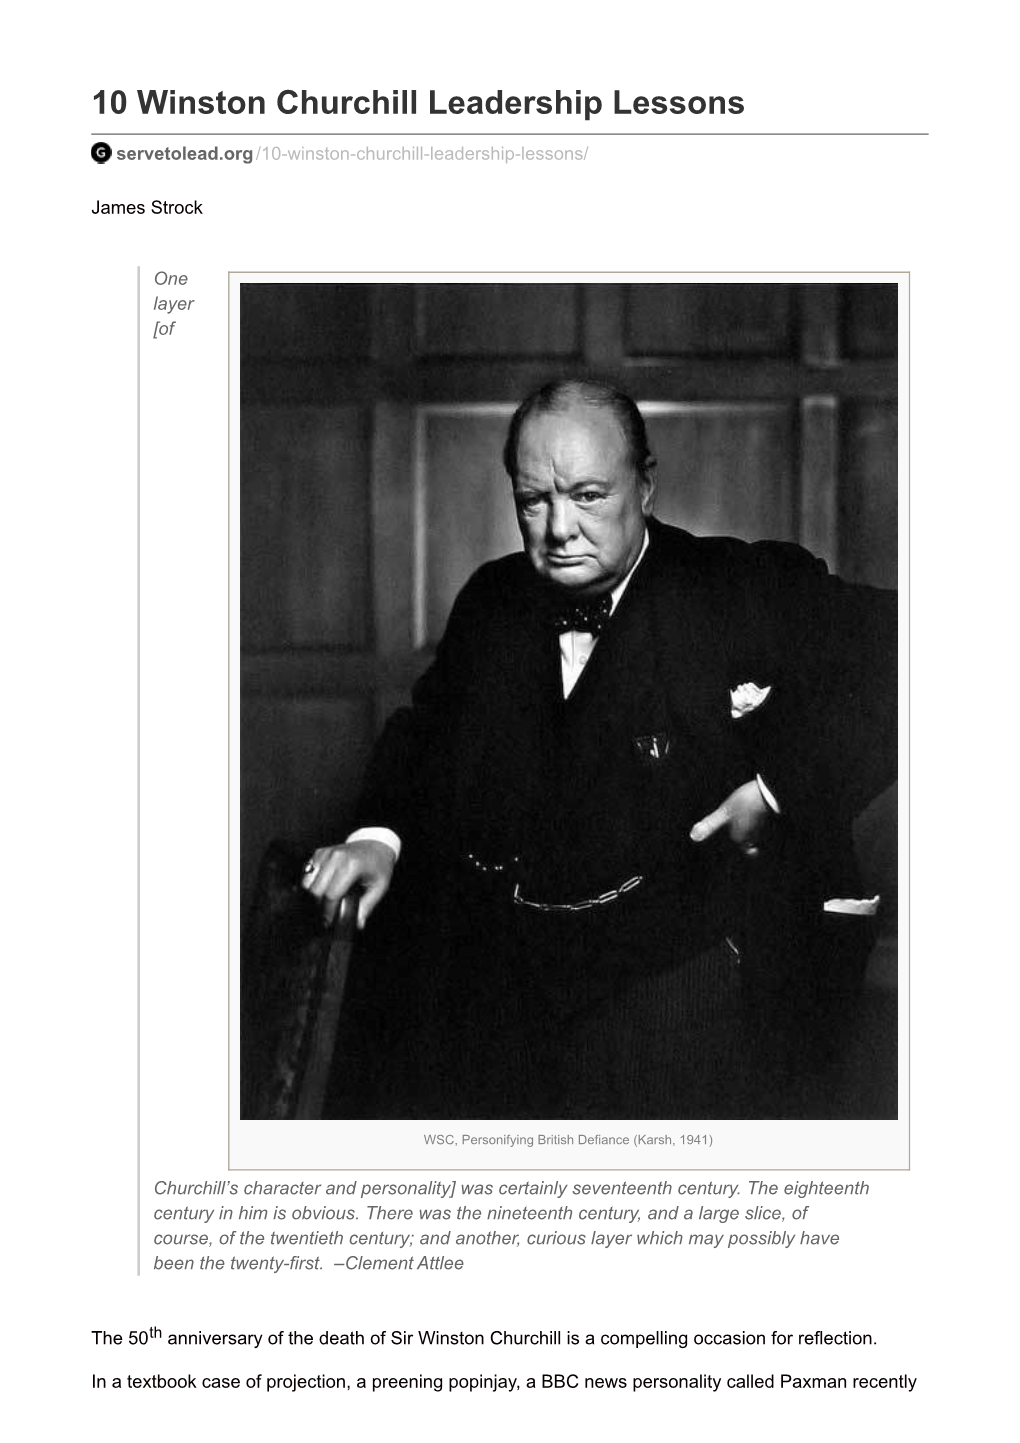 Download 10 Winston Churchill Leadership Lessons from Serve To